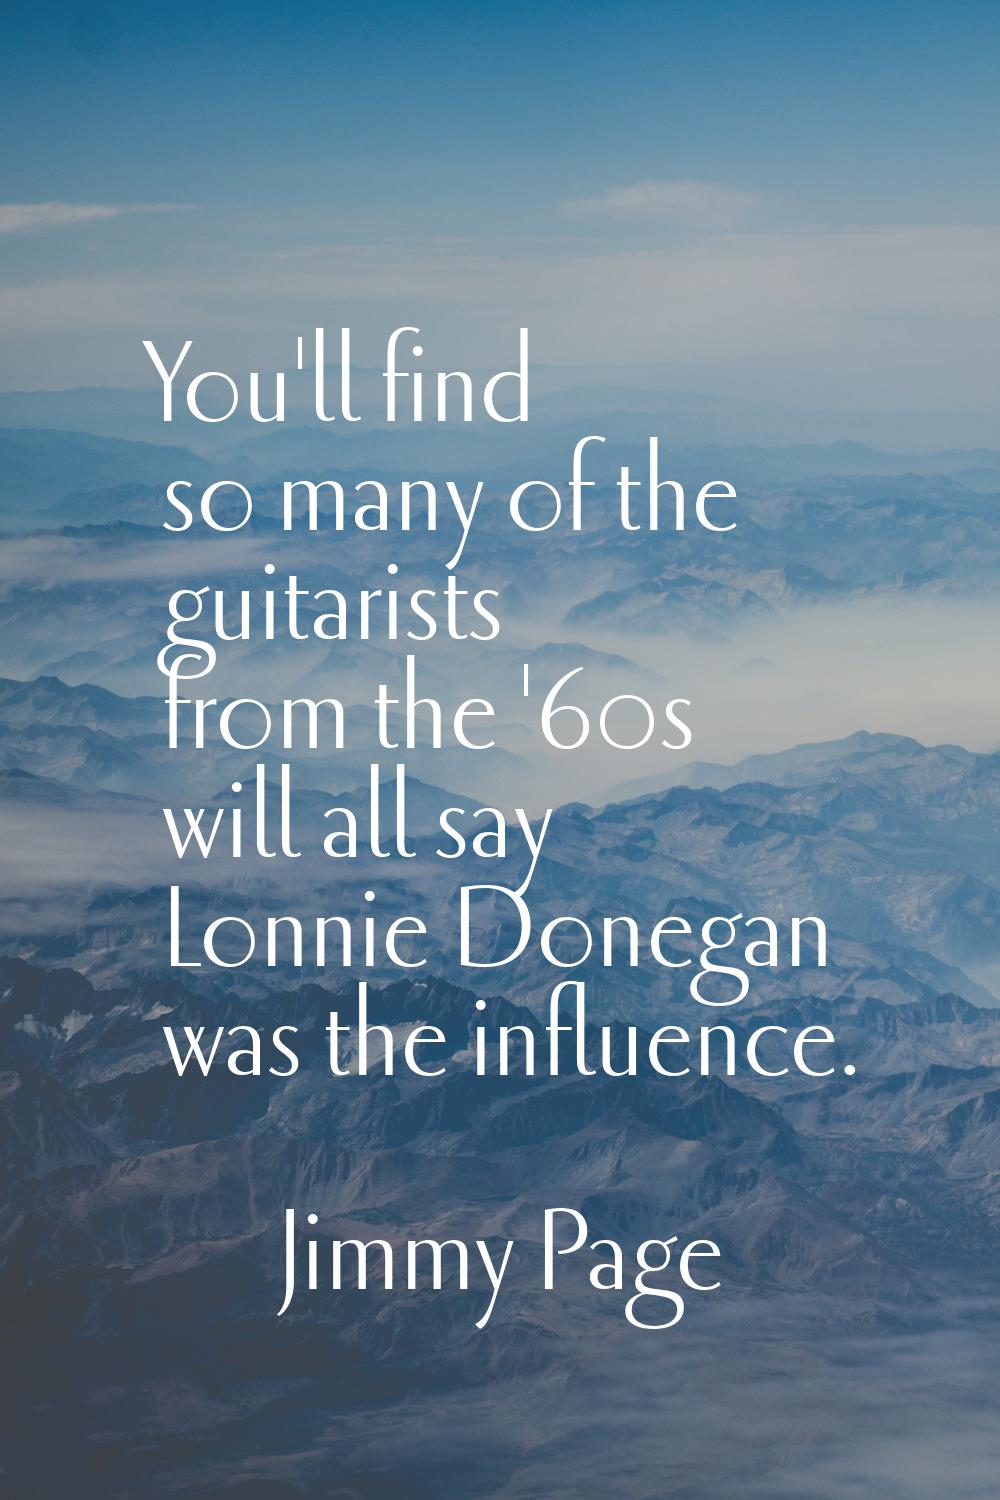 You'll find so many of the guitarists from the '60s will all say Lonnie Donegan was the influence.